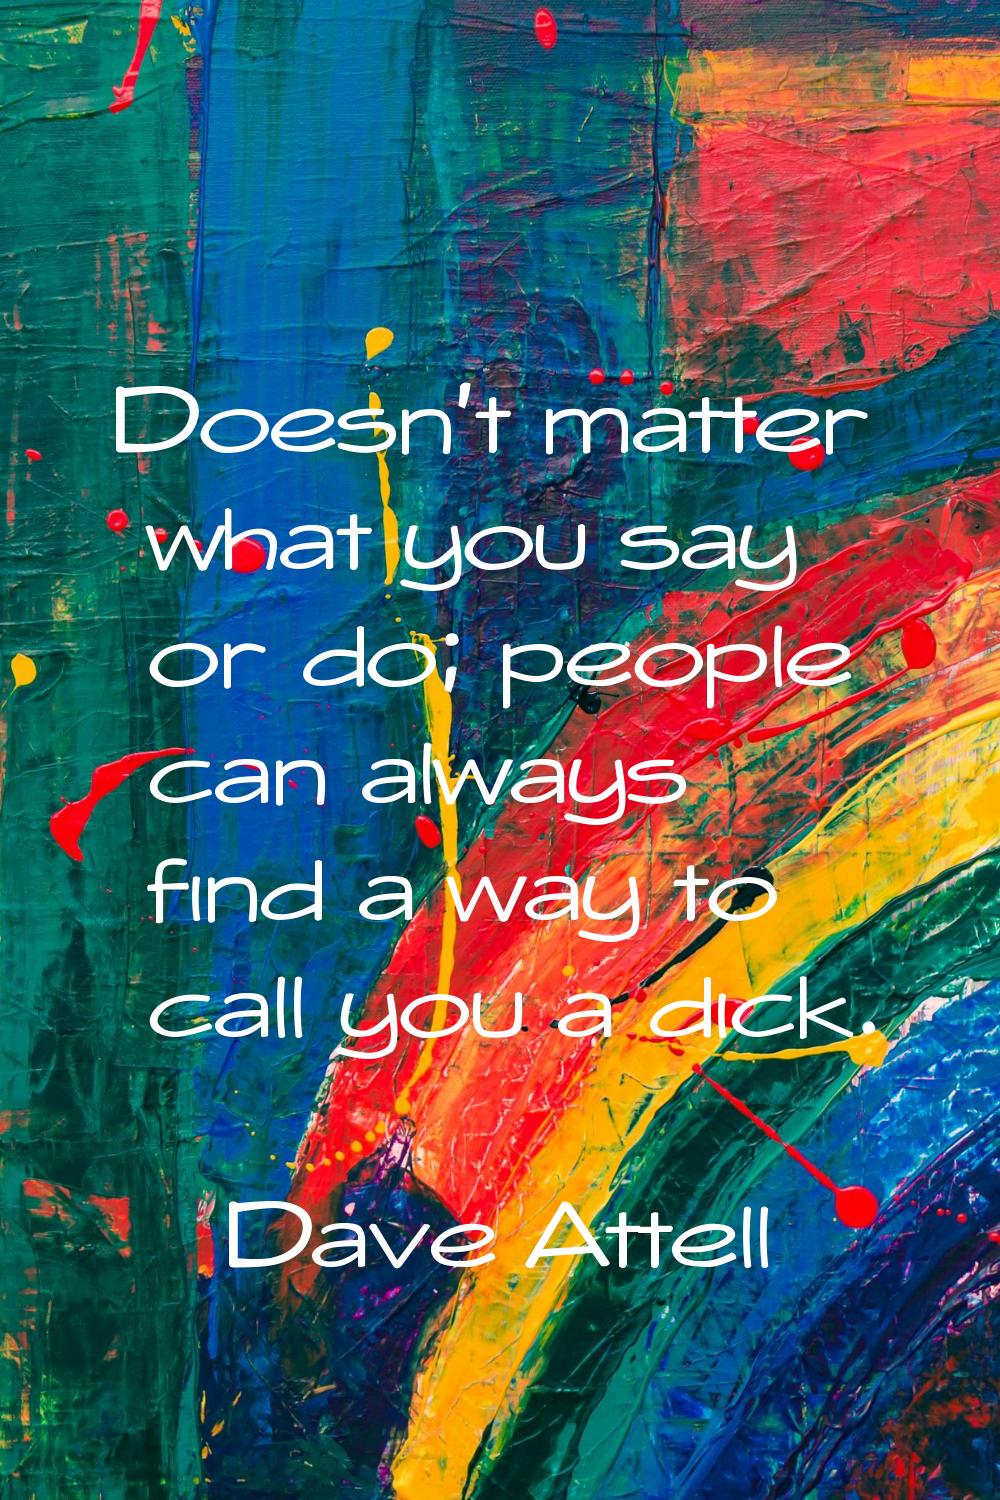 Doesn't matter what you say or do; people can always find a way to call you a dick.